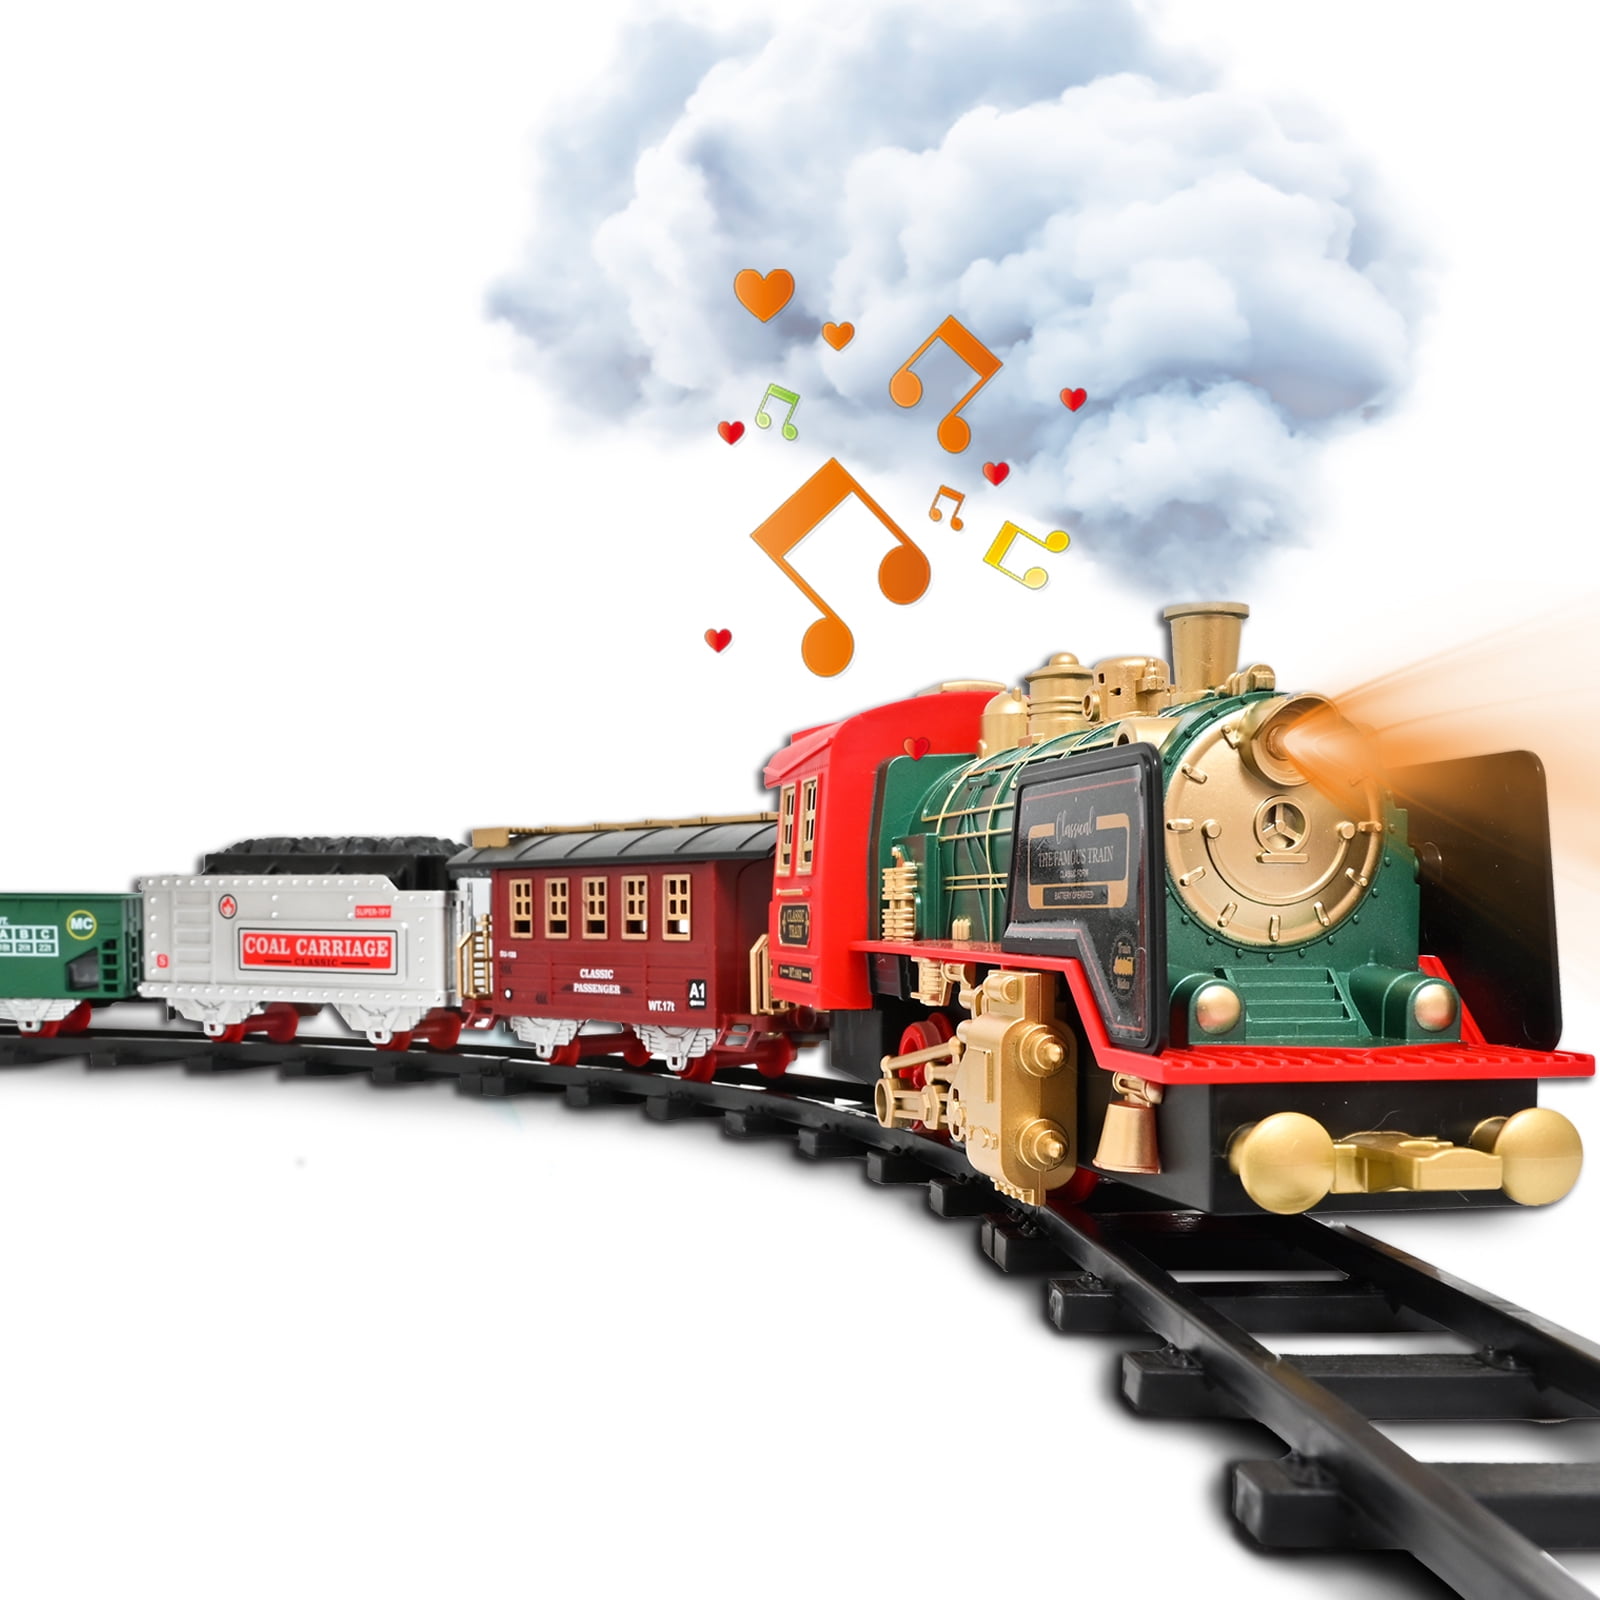 FANL Train Set Toy, RC Train Set W/ Smoke, Lights, Sounds Railway , Rechargeable Electric Train Toy Birthday Gift Toys for Age 3 4 5 6 + Kids